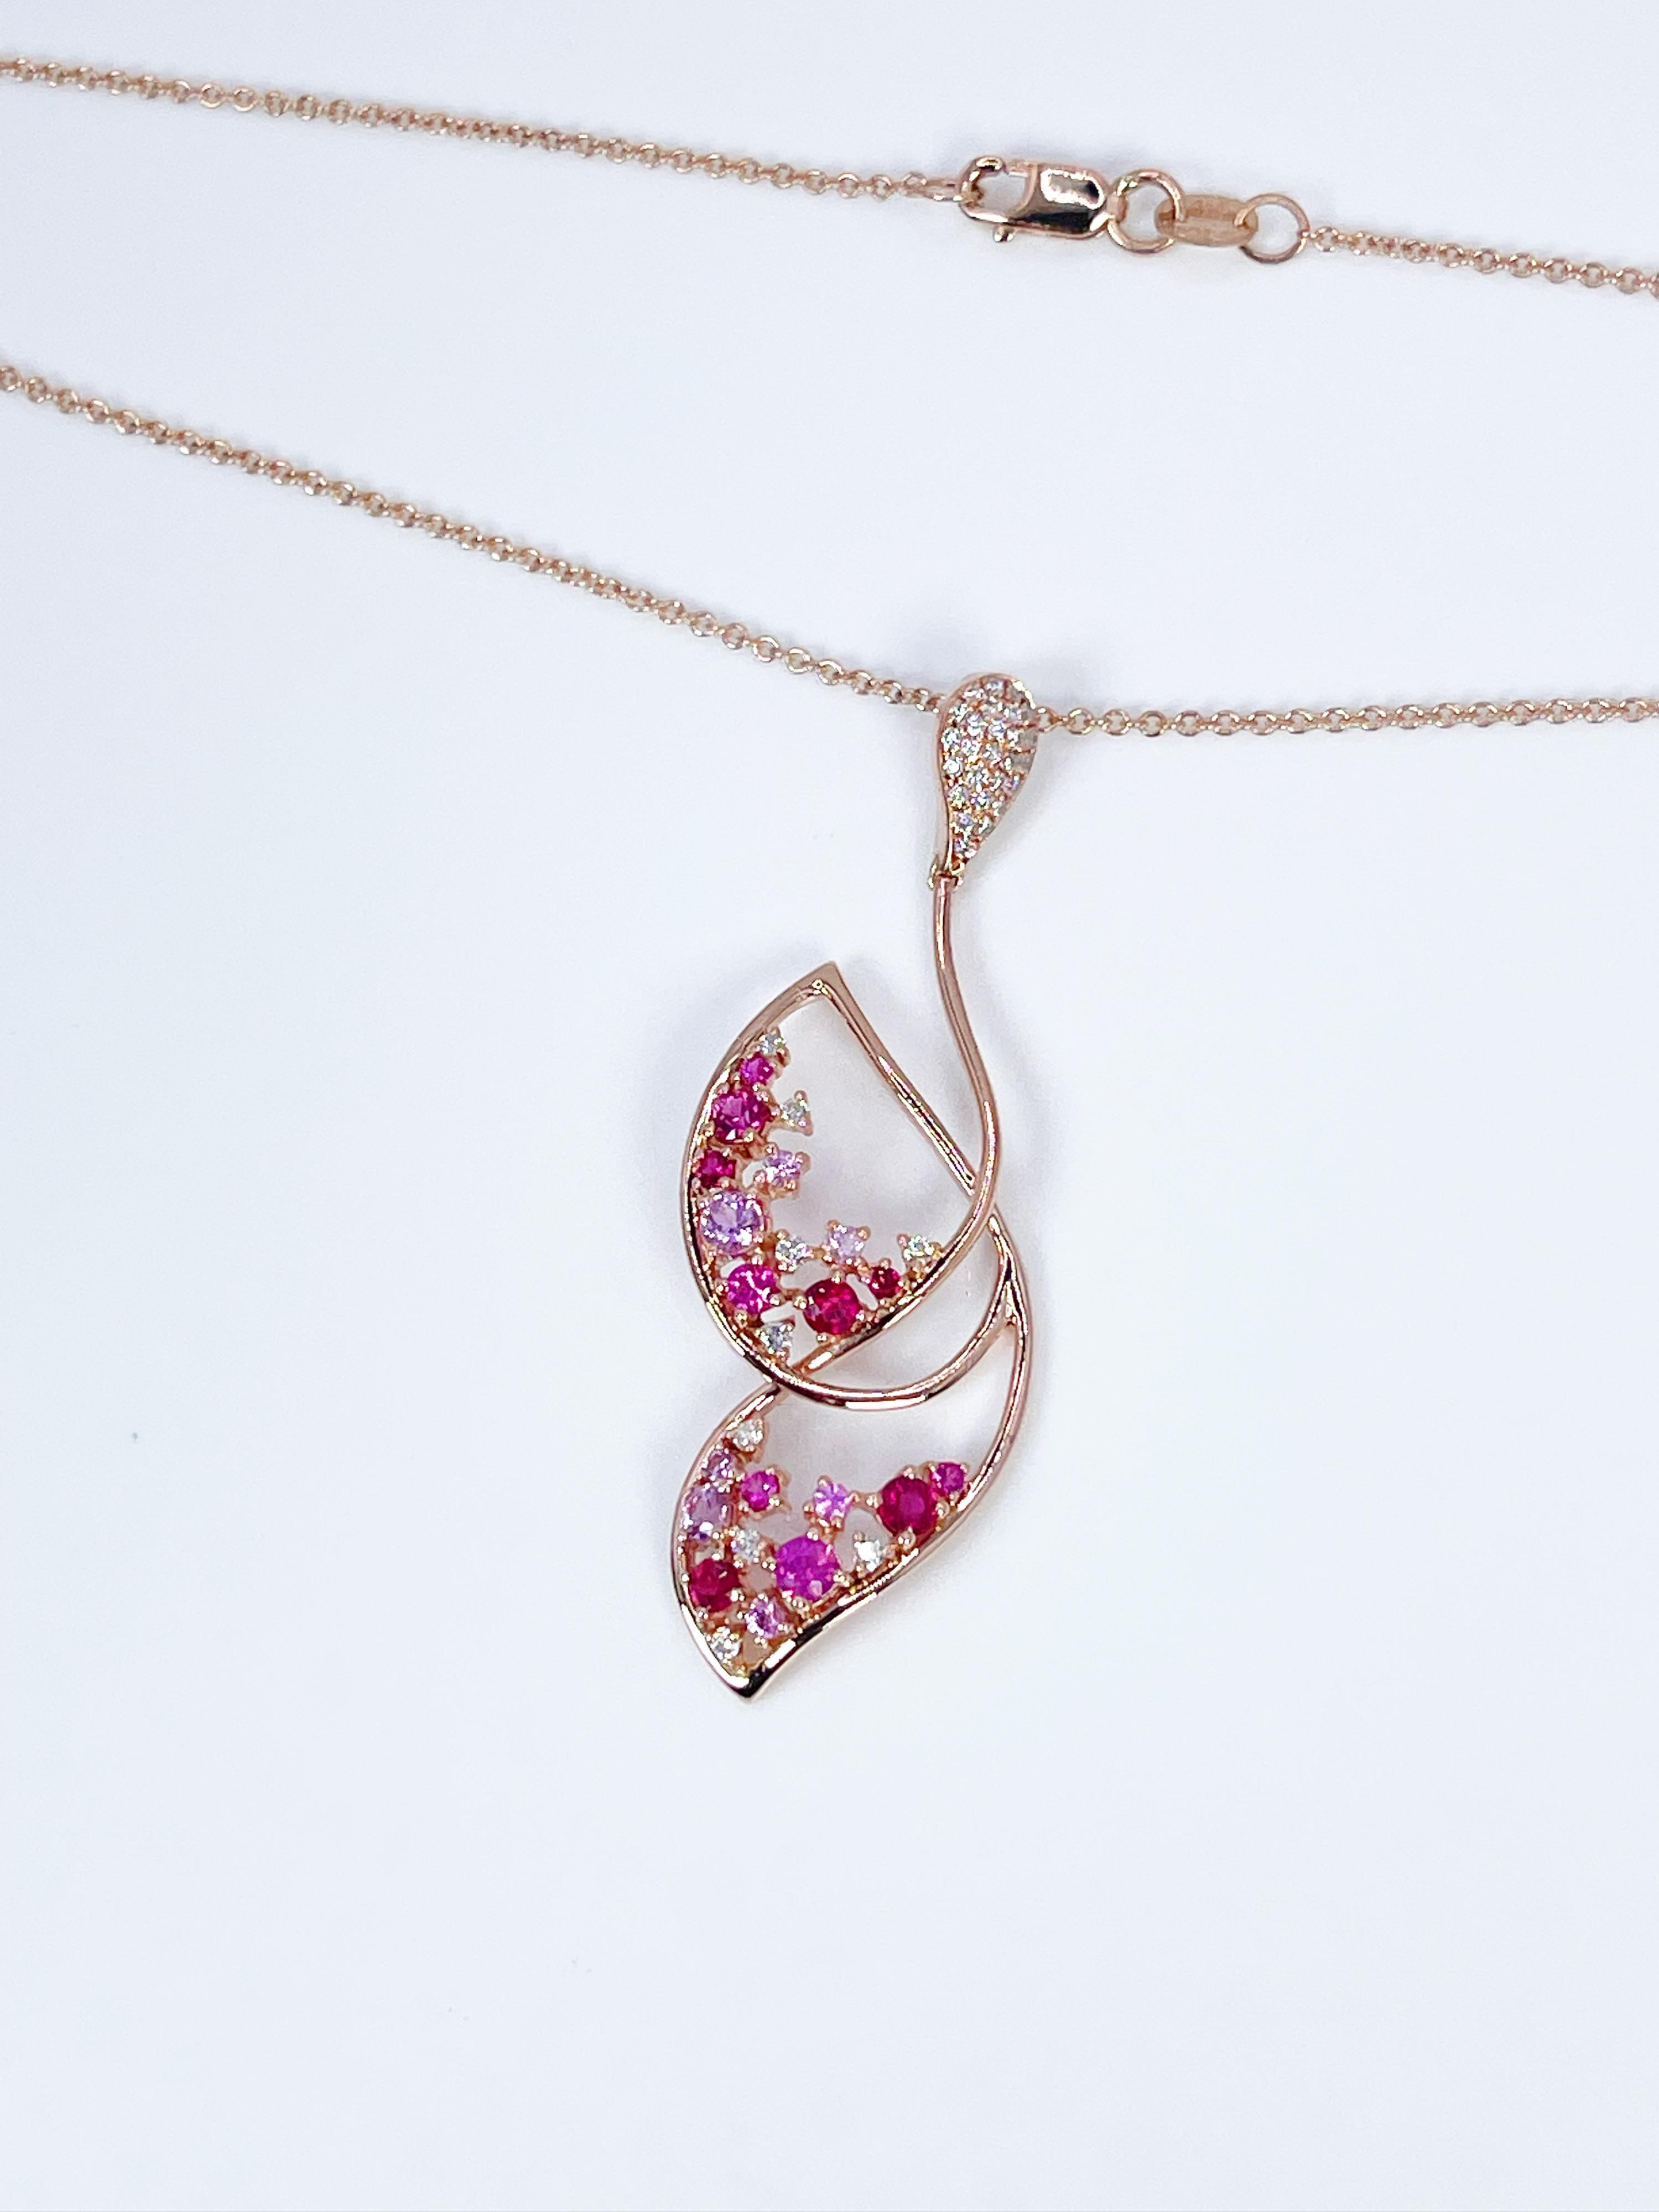 Stunning aartistic pendant made with abstract butterfly in 14KT rose gold. The gemstones are rubies,sapphires and diamonds that were carefully matched to make the ombre pinkish red.

GRAM WEIGHT: 3.72gr
GOLD: 14KT rose gold

NATURAL SAPPHIRE(S)
Cut: